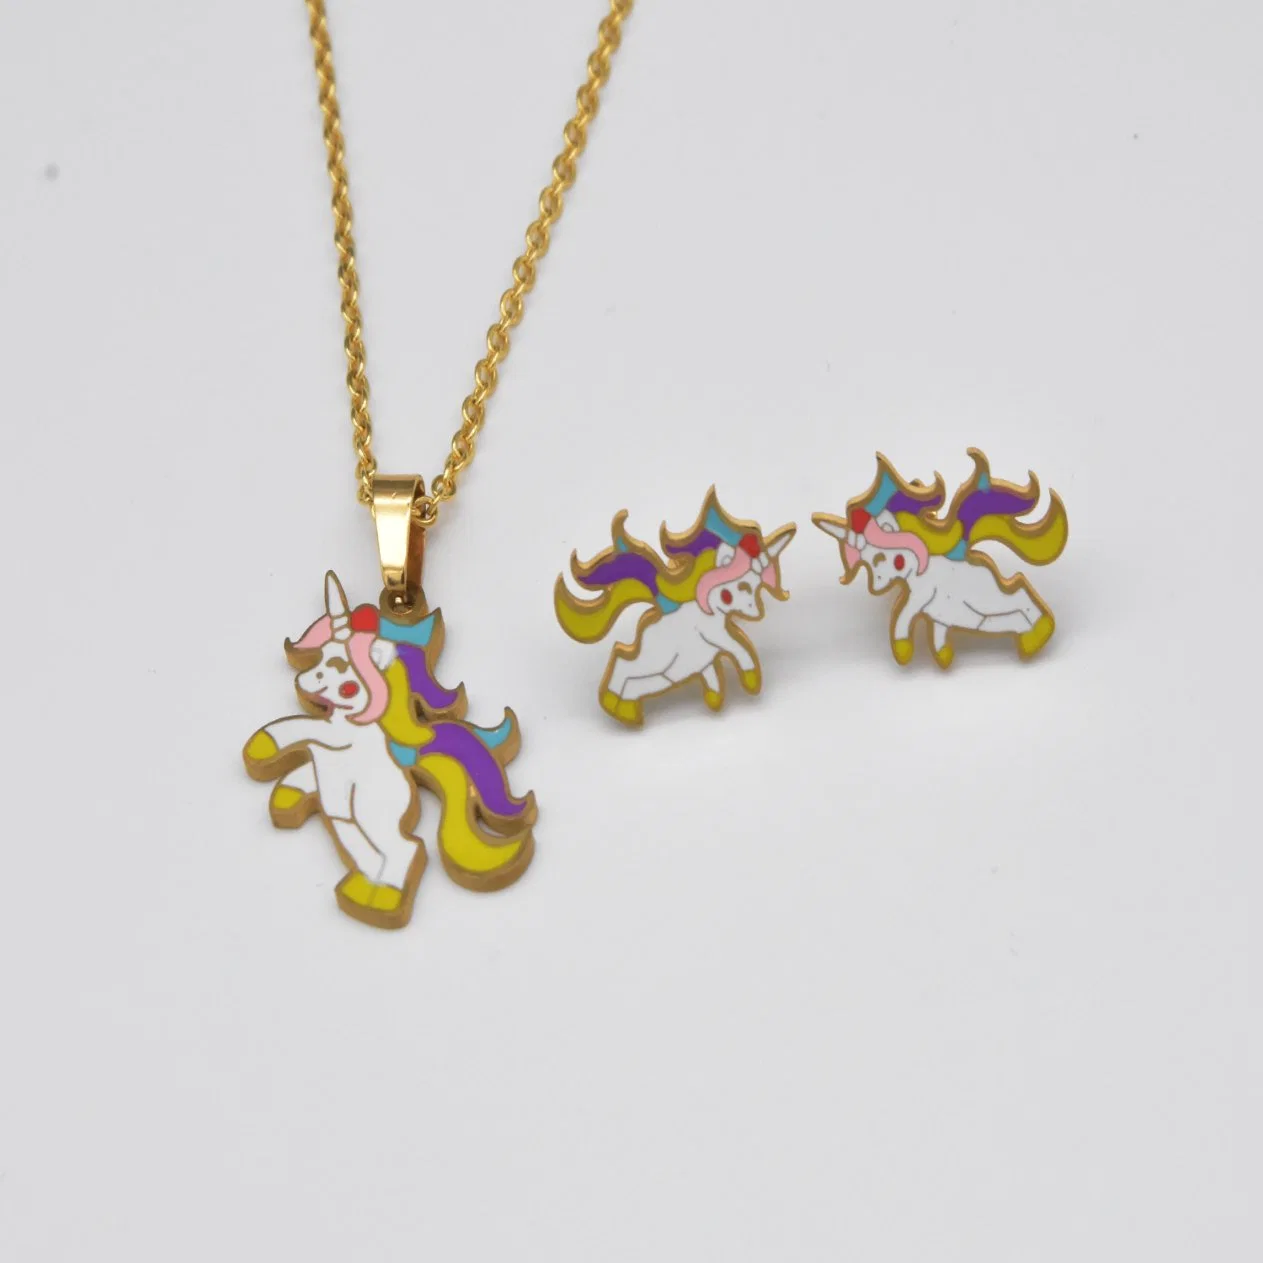 Wholesale New Fashion Gold Plated Unicorns Pendant Necklace Earring Jewelry Set for Girls